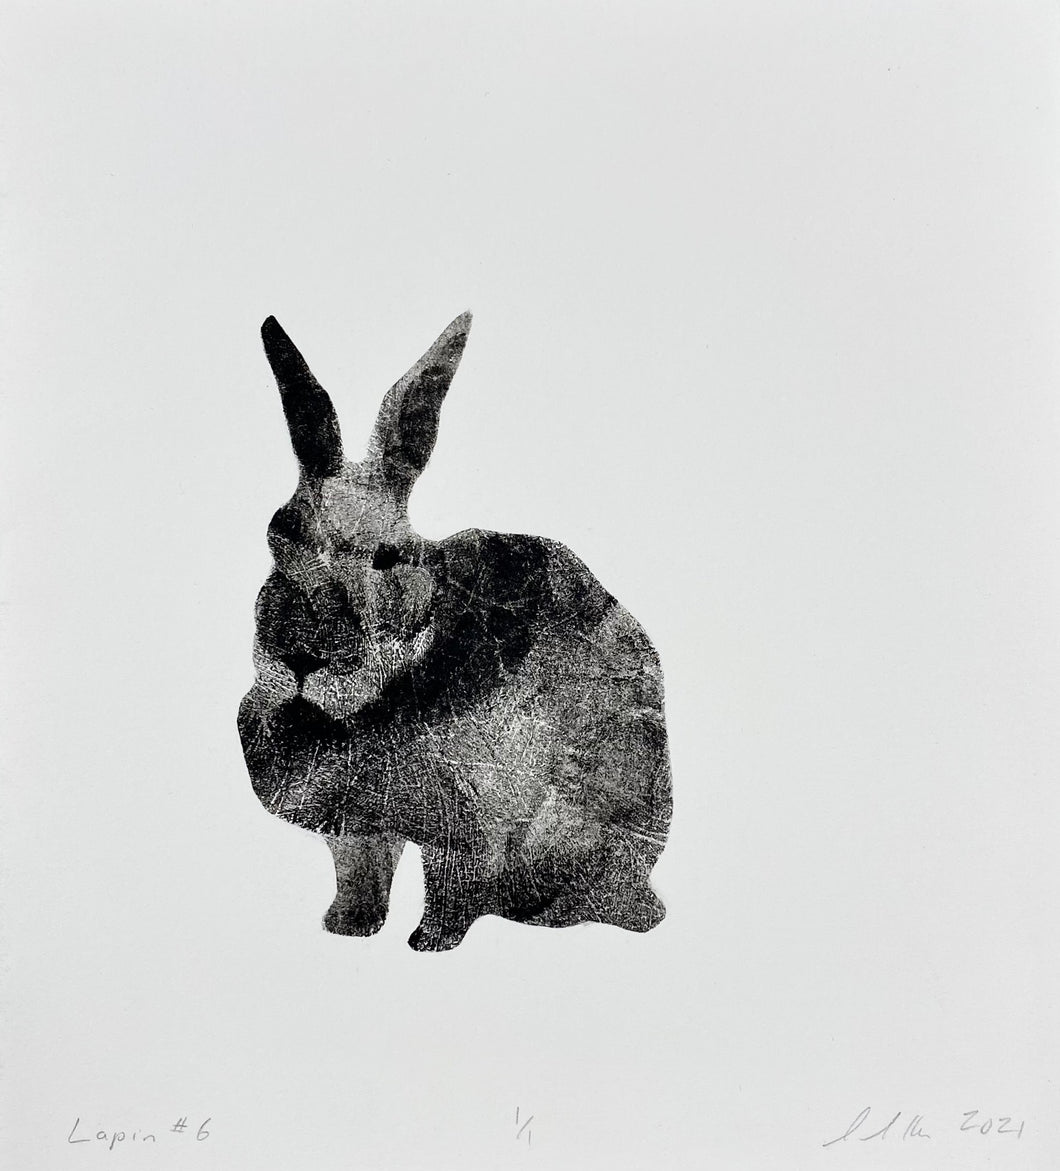 Lapin #6 by Susan Hall